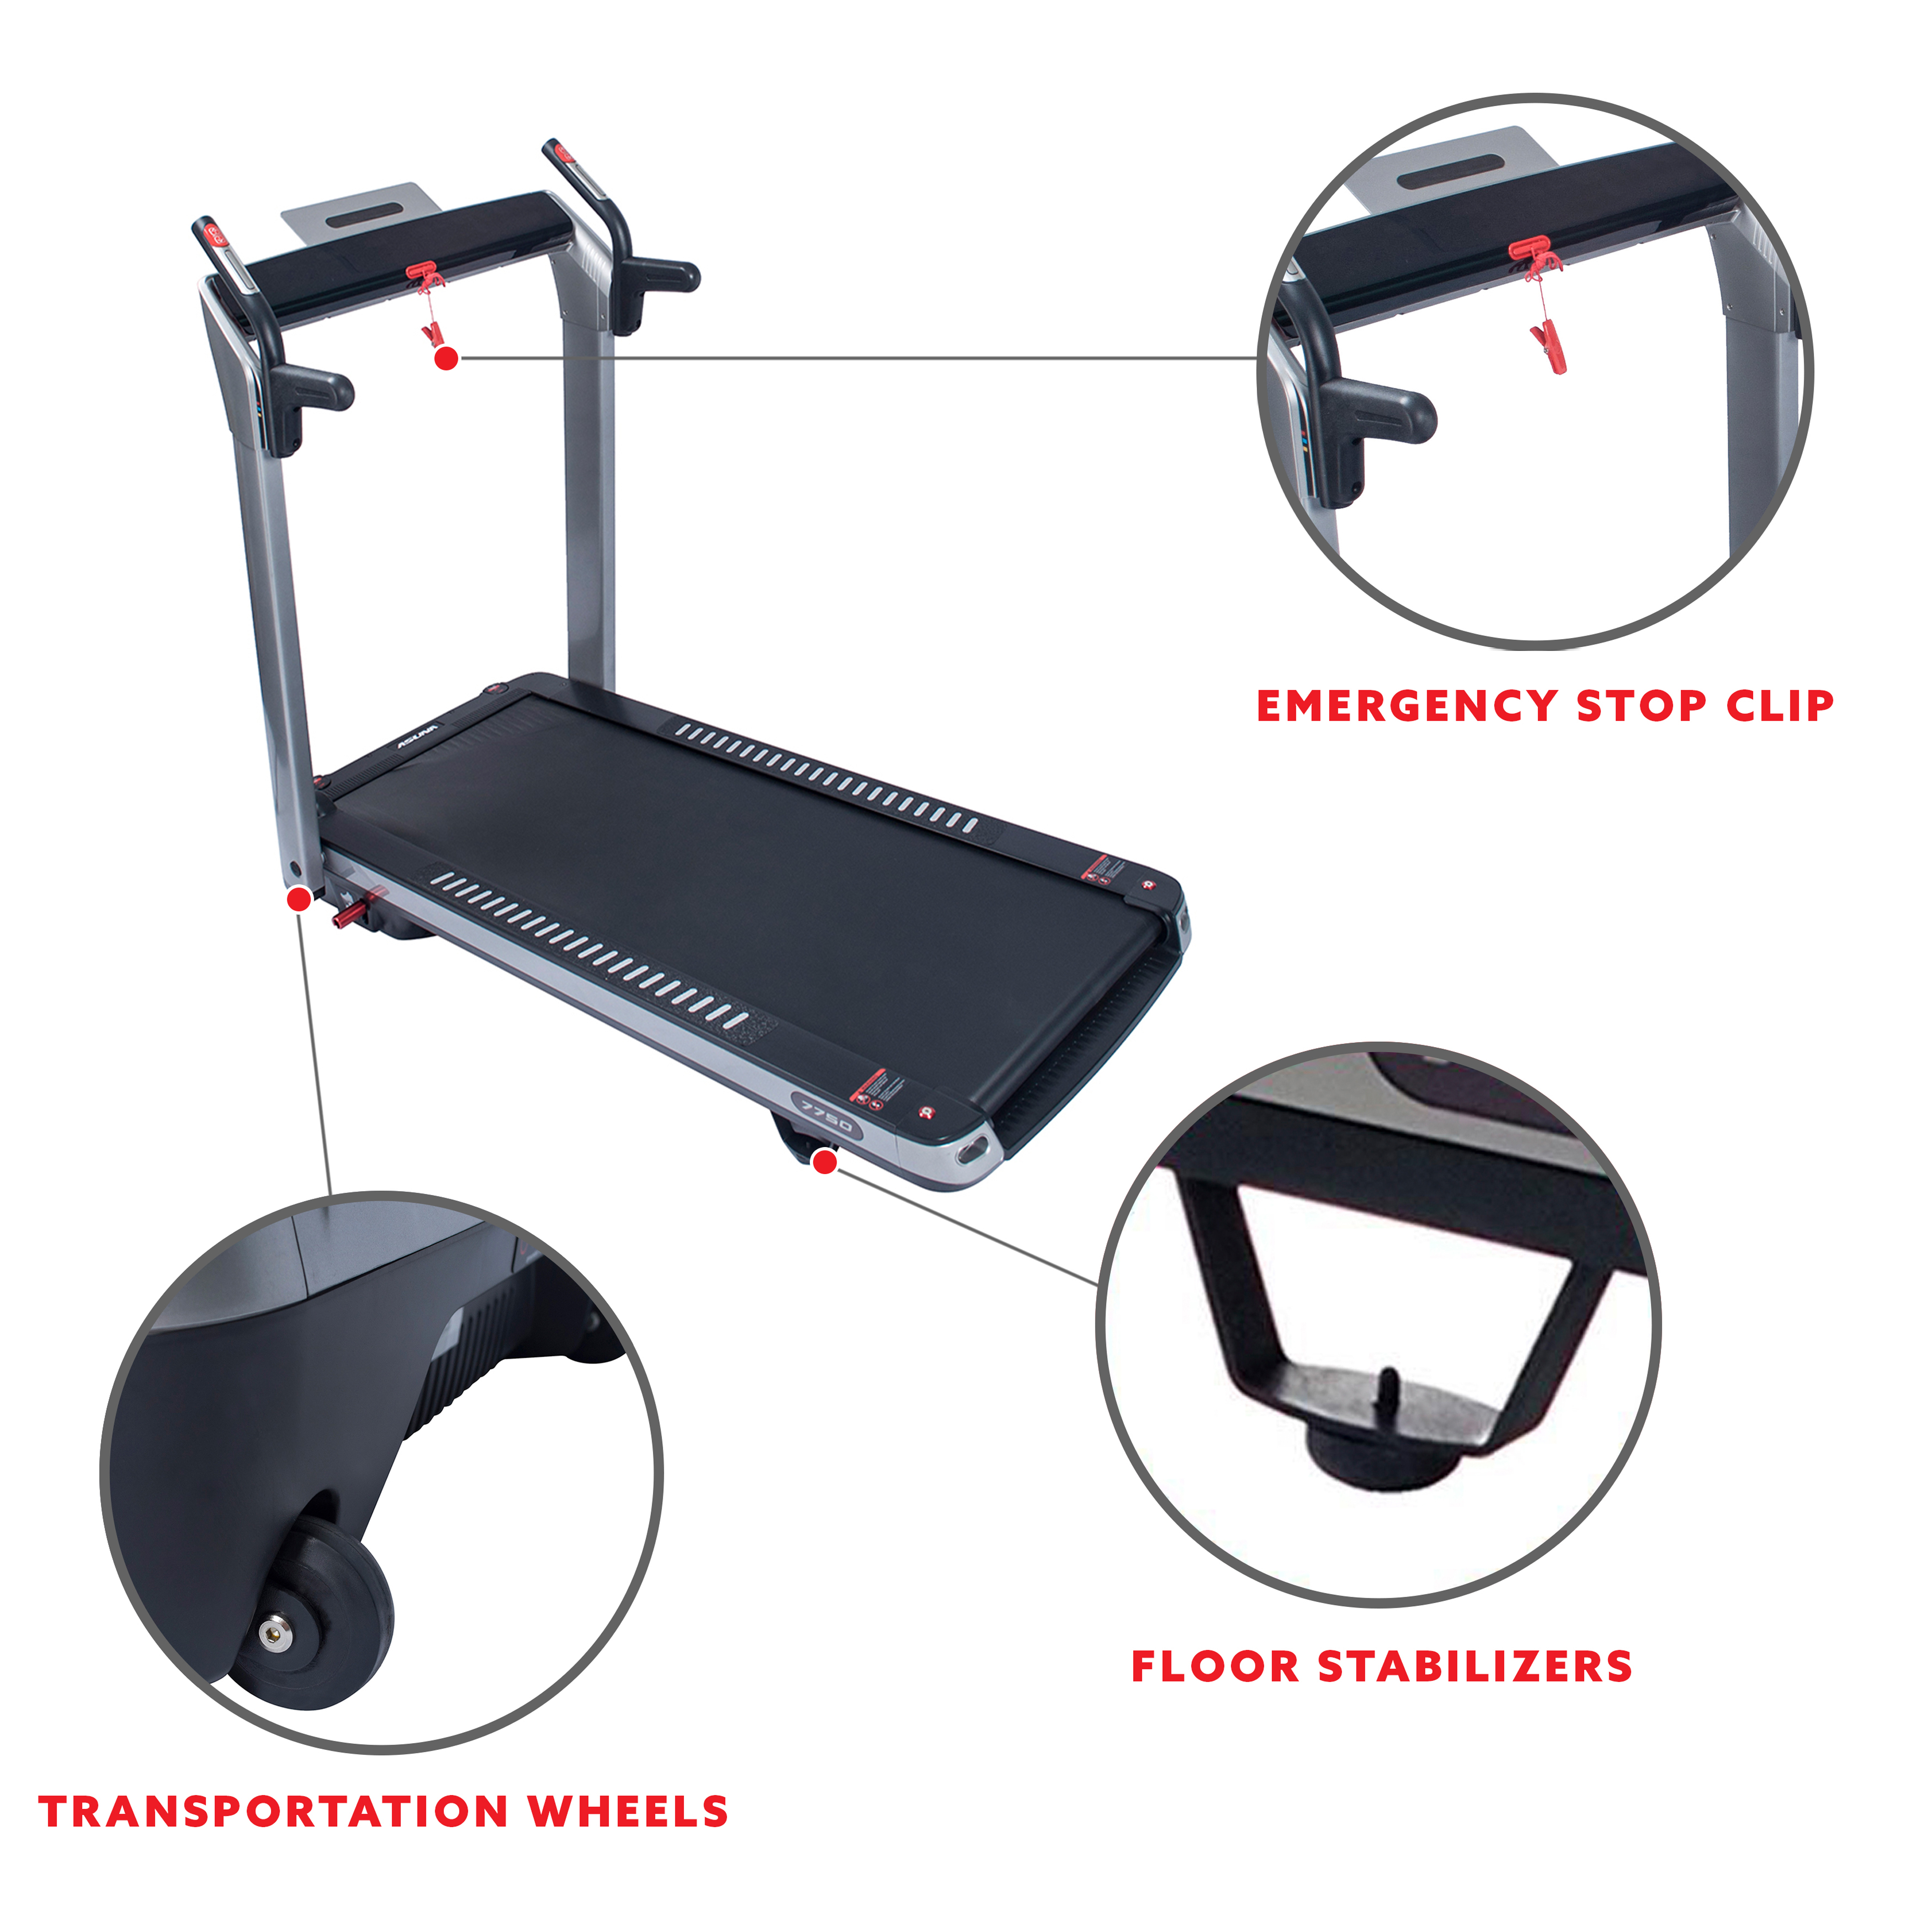 ASUNA 7750 Spaceflex Motorized Foldable Treadmill with Speakers, 6 LED Displays, 220 lb Max Weight - image 5 of 9